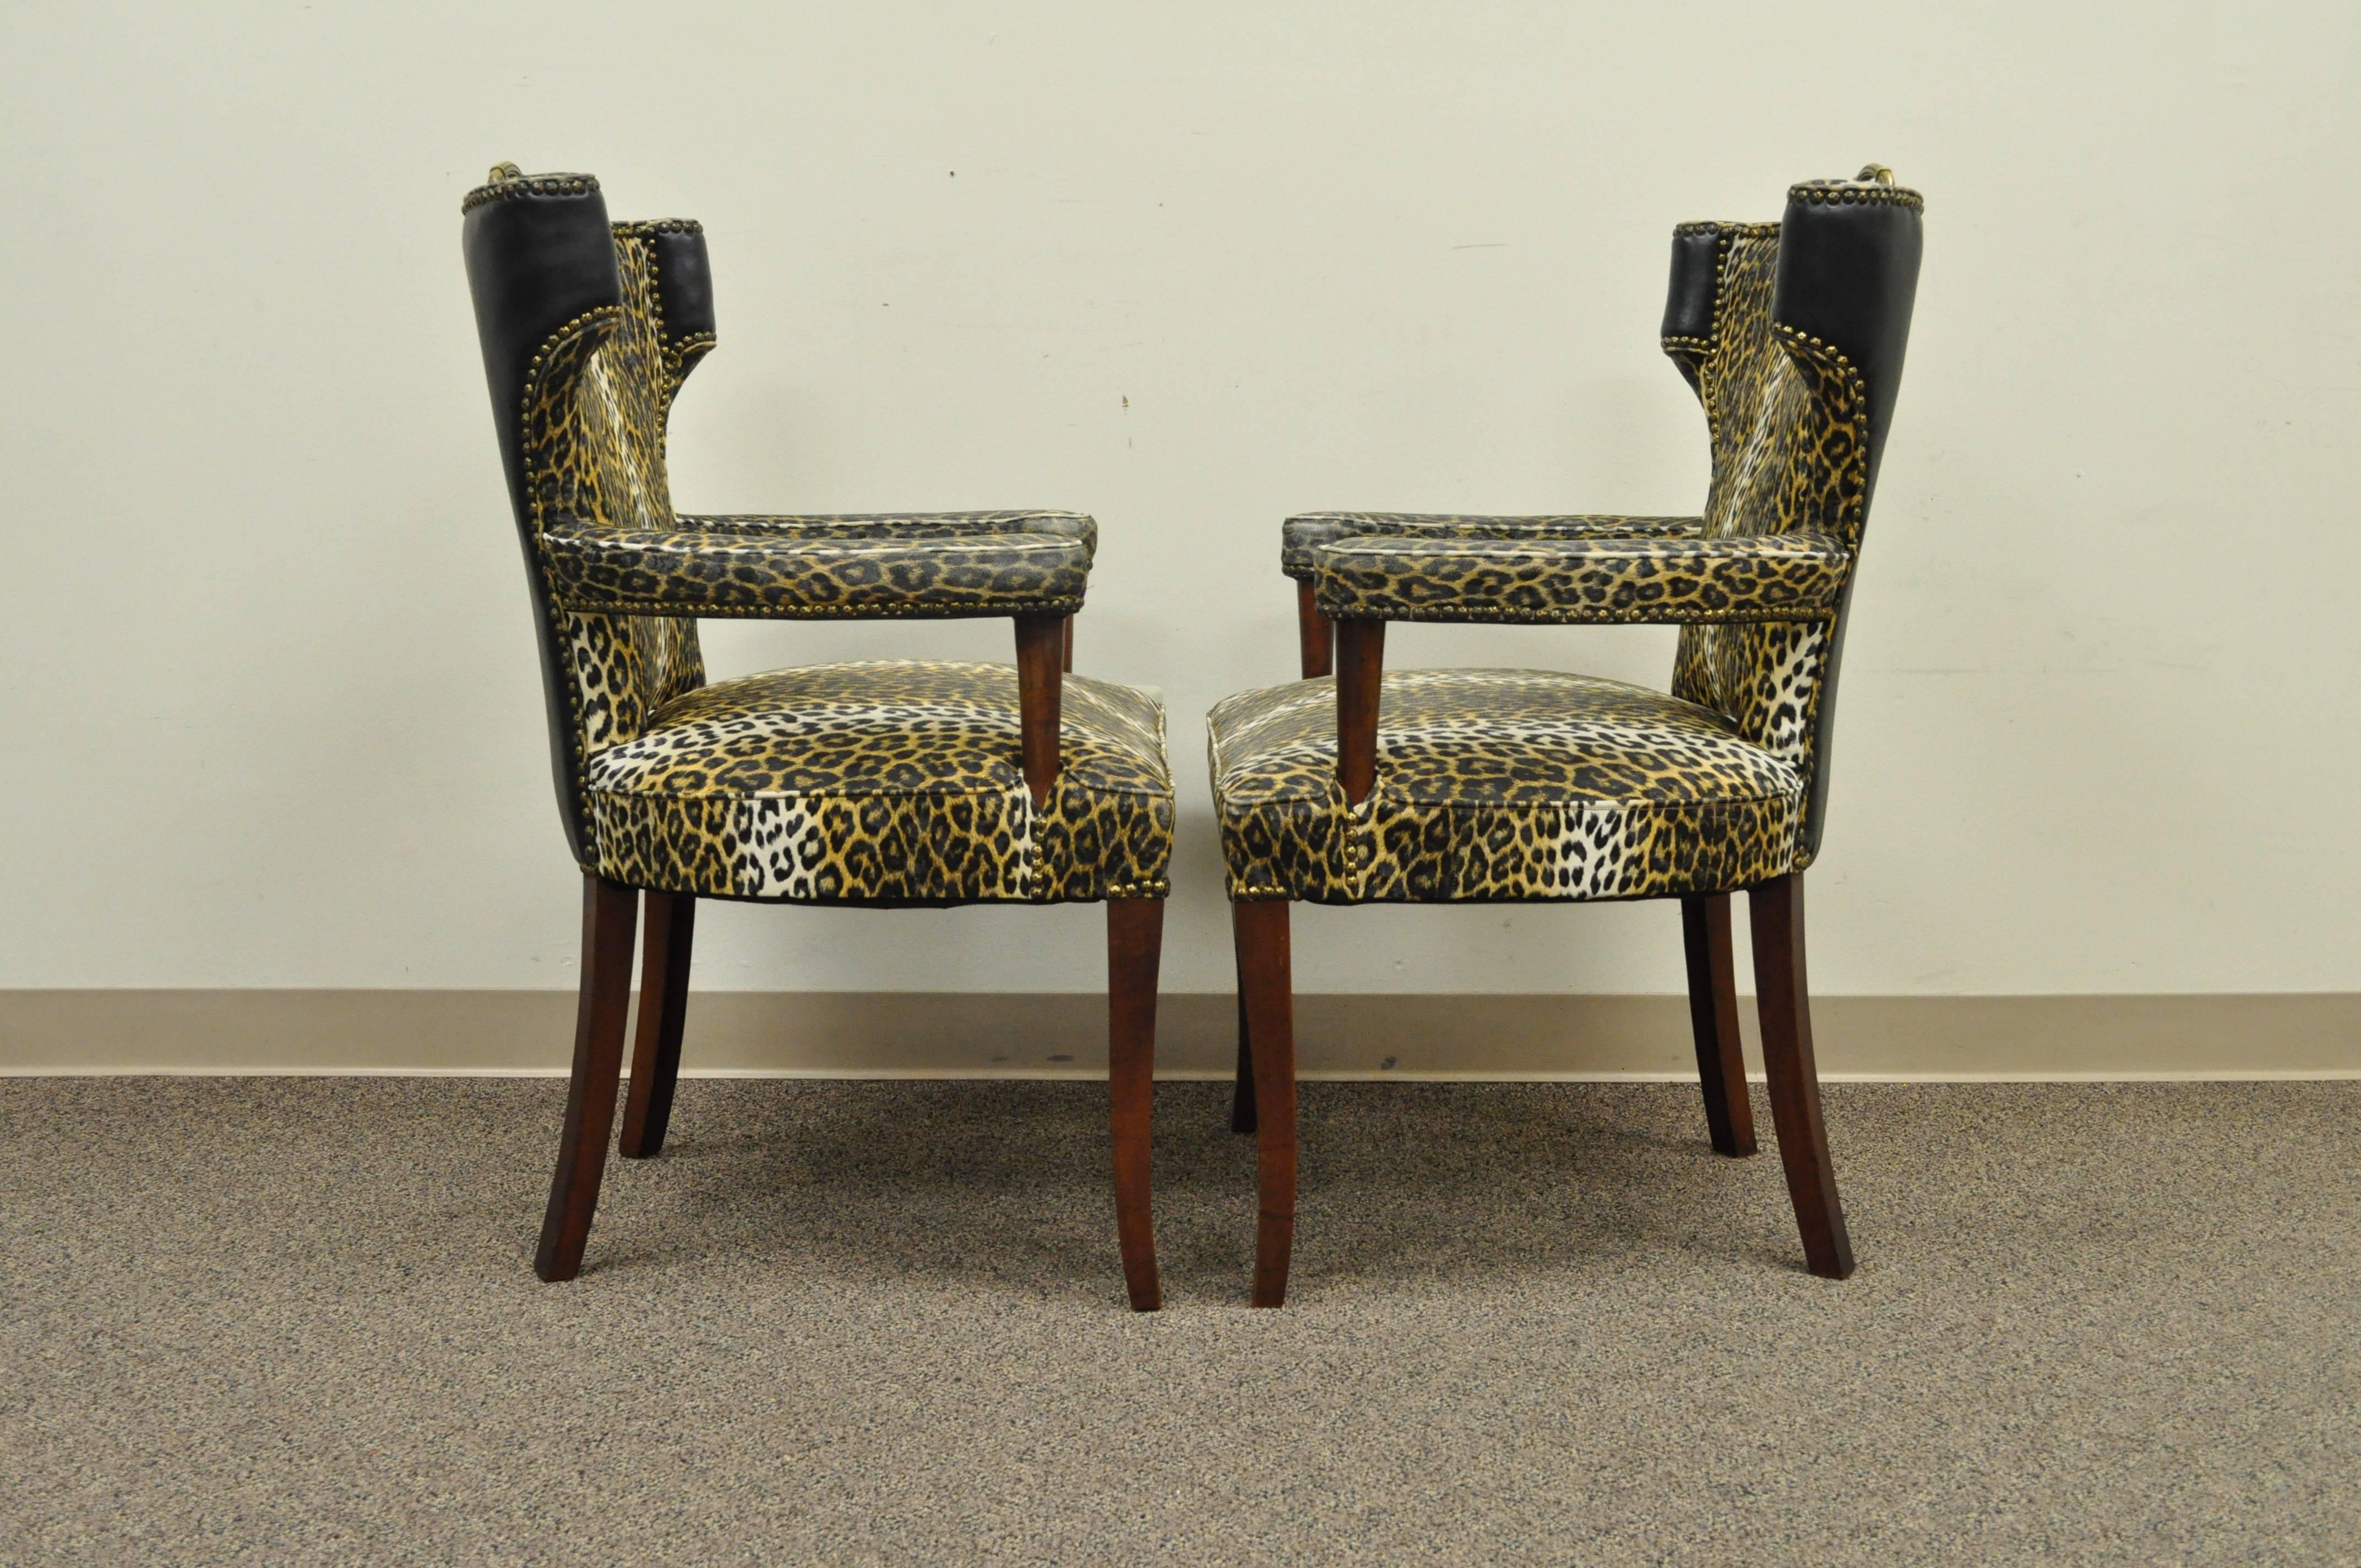 Pair of Dorothy Draper Hollywood Regency Leopard Printed Vinyl Curved Armchairs In Good Condition For Sale In Philadelphia, PA